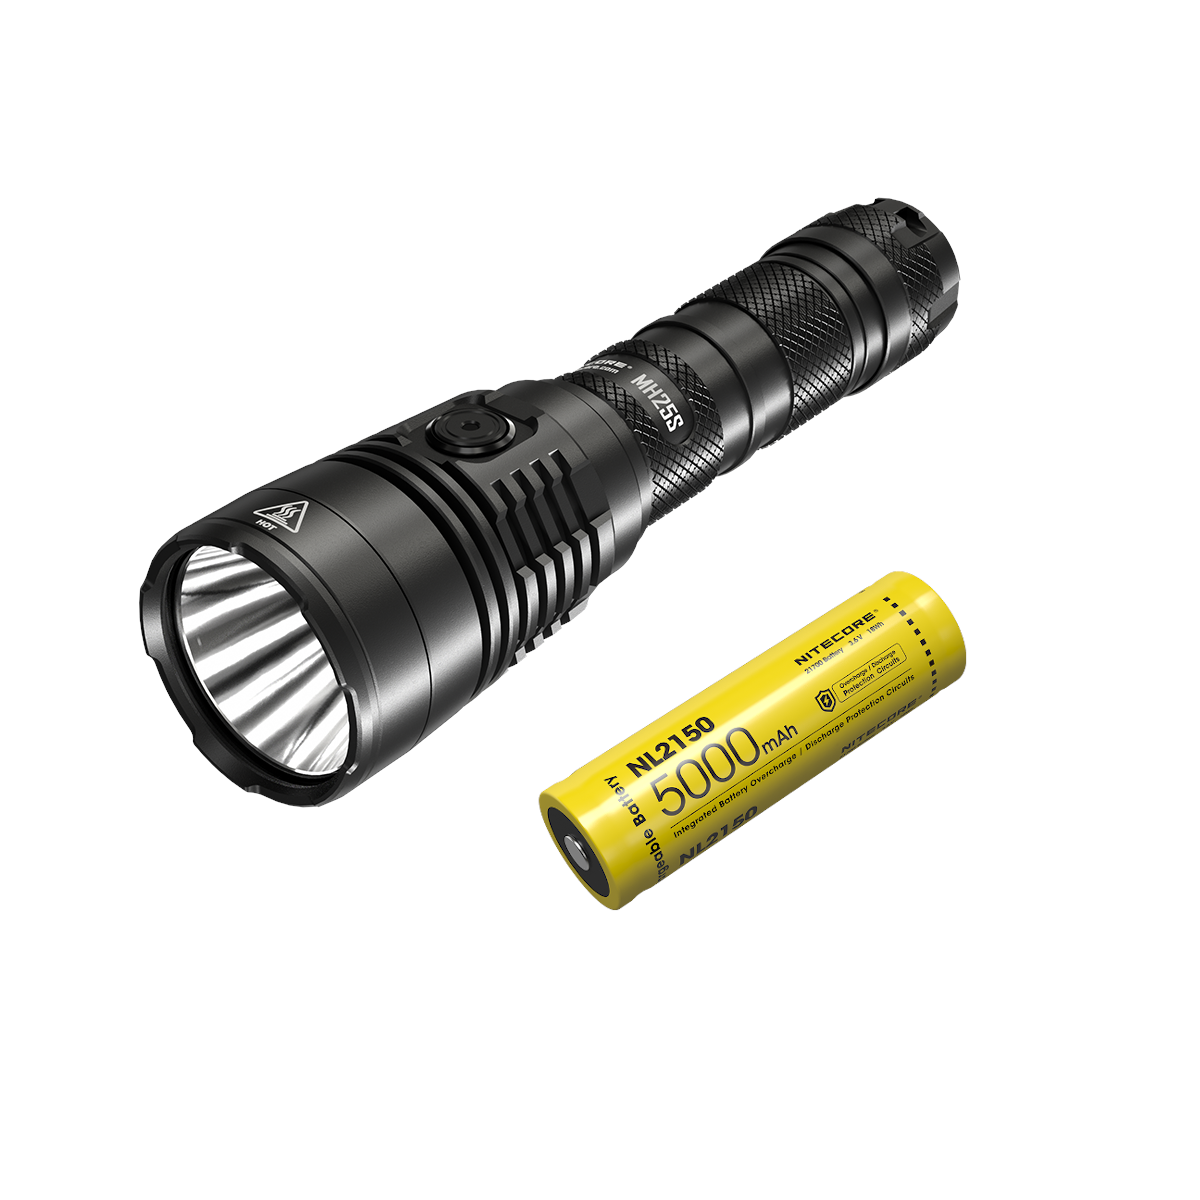 Nitecore MH25S SST40 1800lm USB-C Rechargeable Tactical Faslhlight with 5000mAh 21700 Battery 5 Modes Adjustable LED Tor